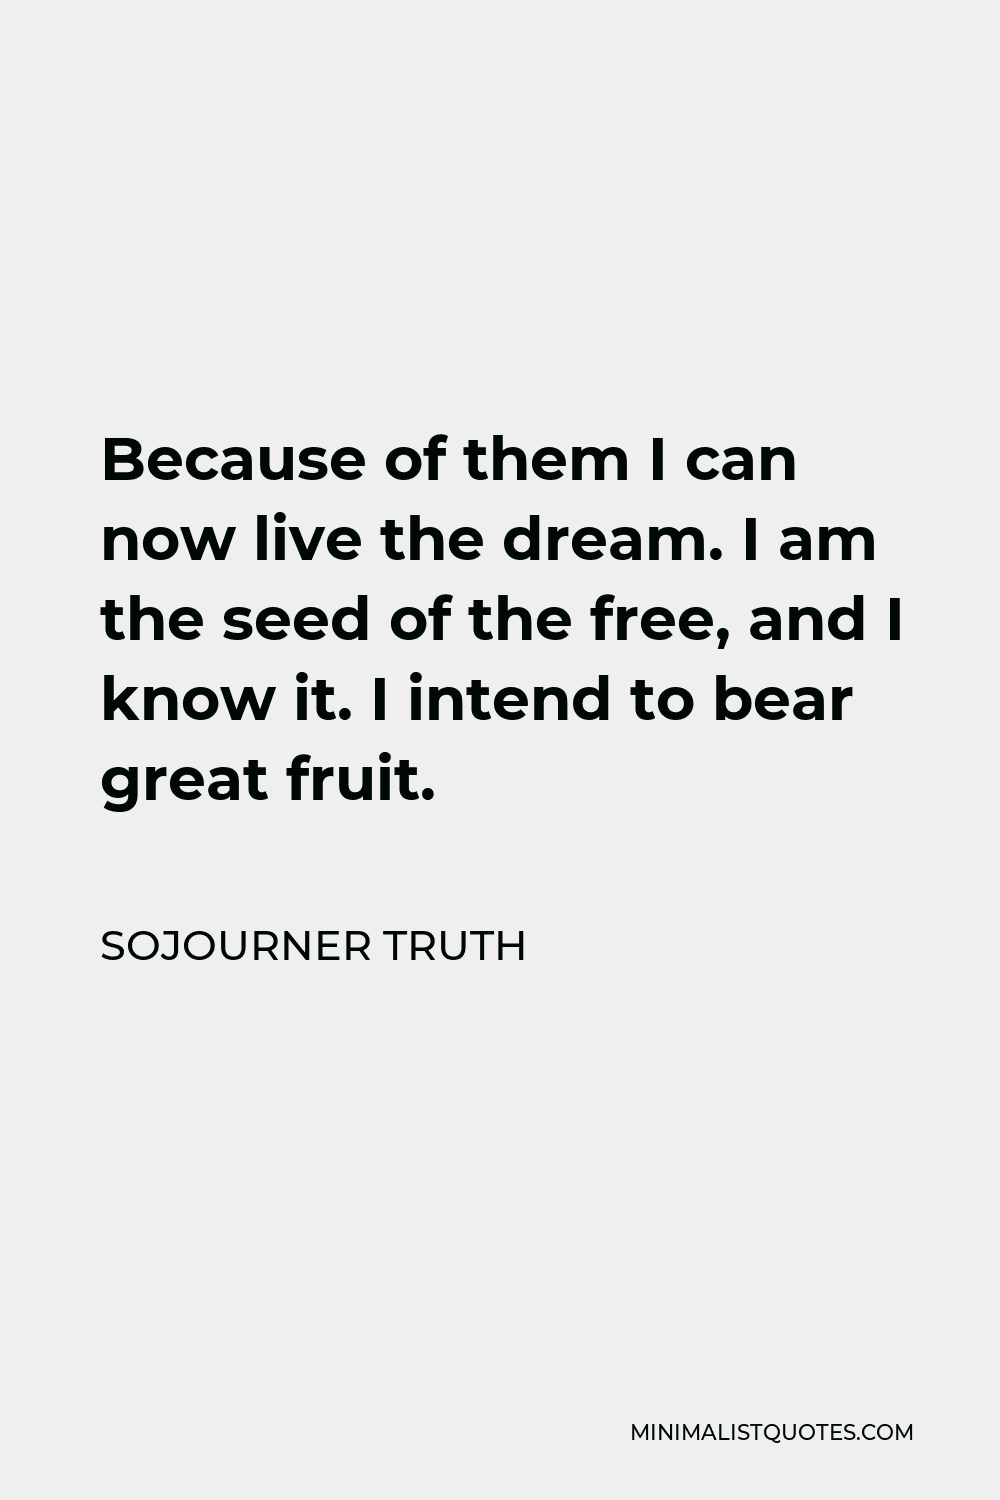 Sojourner Truth Quote - Because of them I can now live the dream. I am the seed of the free, and I know it. I intend to bear great fruit.